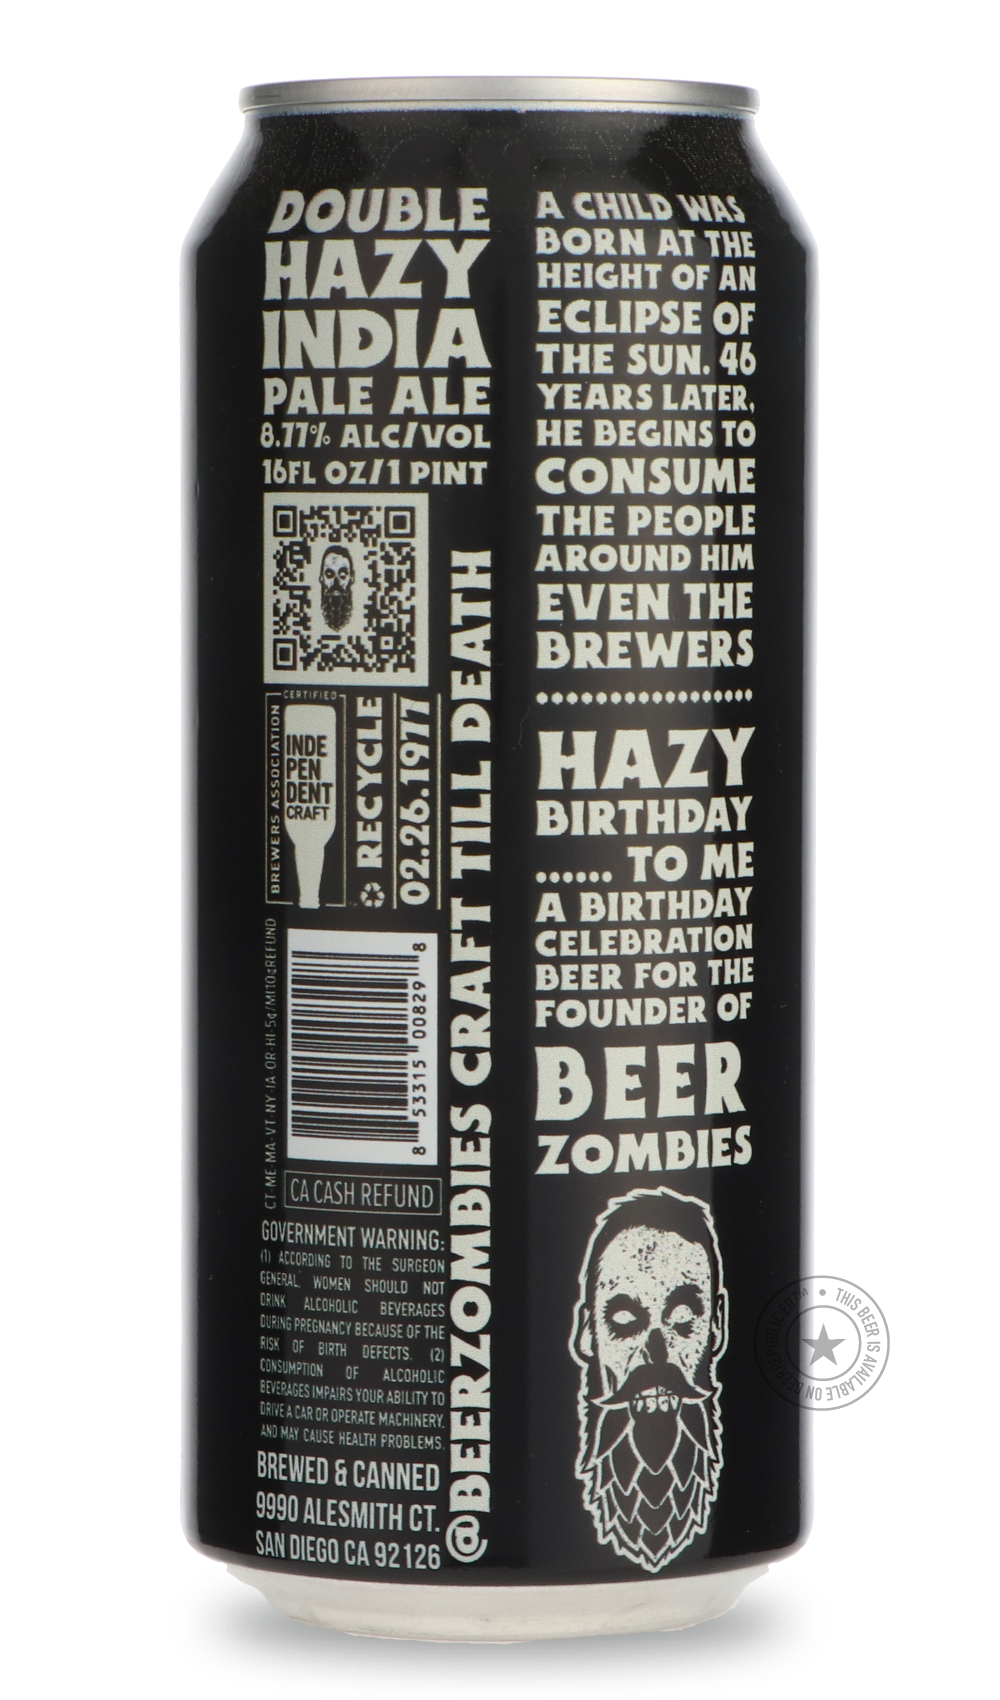 -Beer Zombies- Hazy Birthday To Me-IPA- Only @ Beer Republic - The best online beer store for American & Canadian craft beer - Buy beer online from the USA and Canada - Bier online kopen - Amerikaans bier kopen - Craft beer store - Craft beer kopen - Amerikanisch bier kaufen - Bier online kaufen - Acheter biere online - IPA - Stout - Porter - New England IPA - Hazy IPA - Imperial Stout - Barrel Aged - Barrel Aged Imperial Stout - Brown - Dark beer - Blond - Blonde - Pilsner - Lager - Wheat - Weizen - Amber 